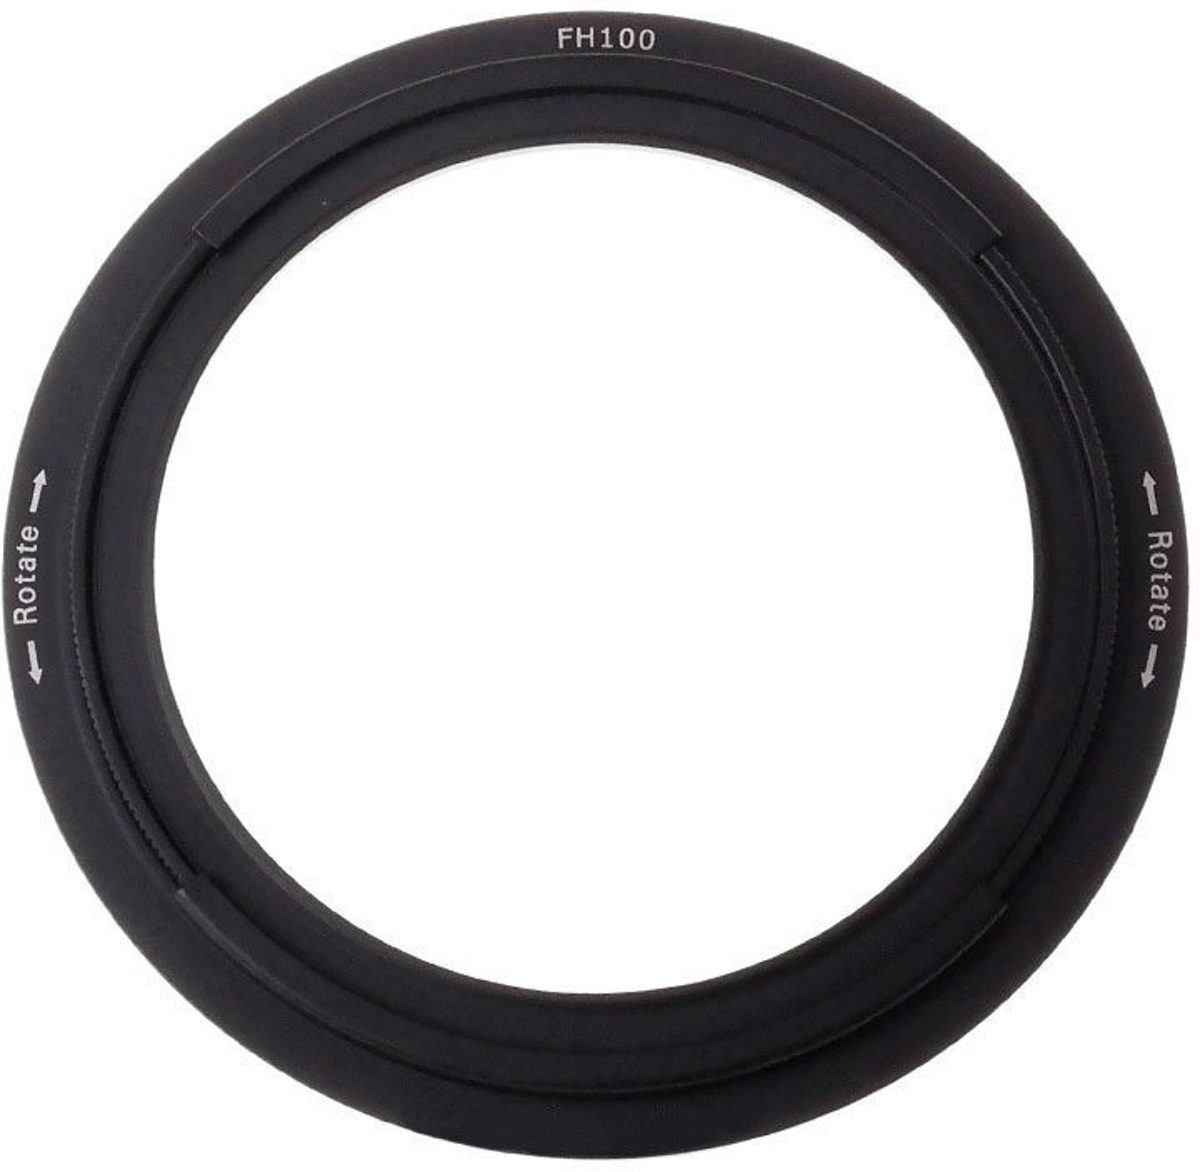 Benro 86mm Lens Ring For FH100, Fit 95mm Slim CPL